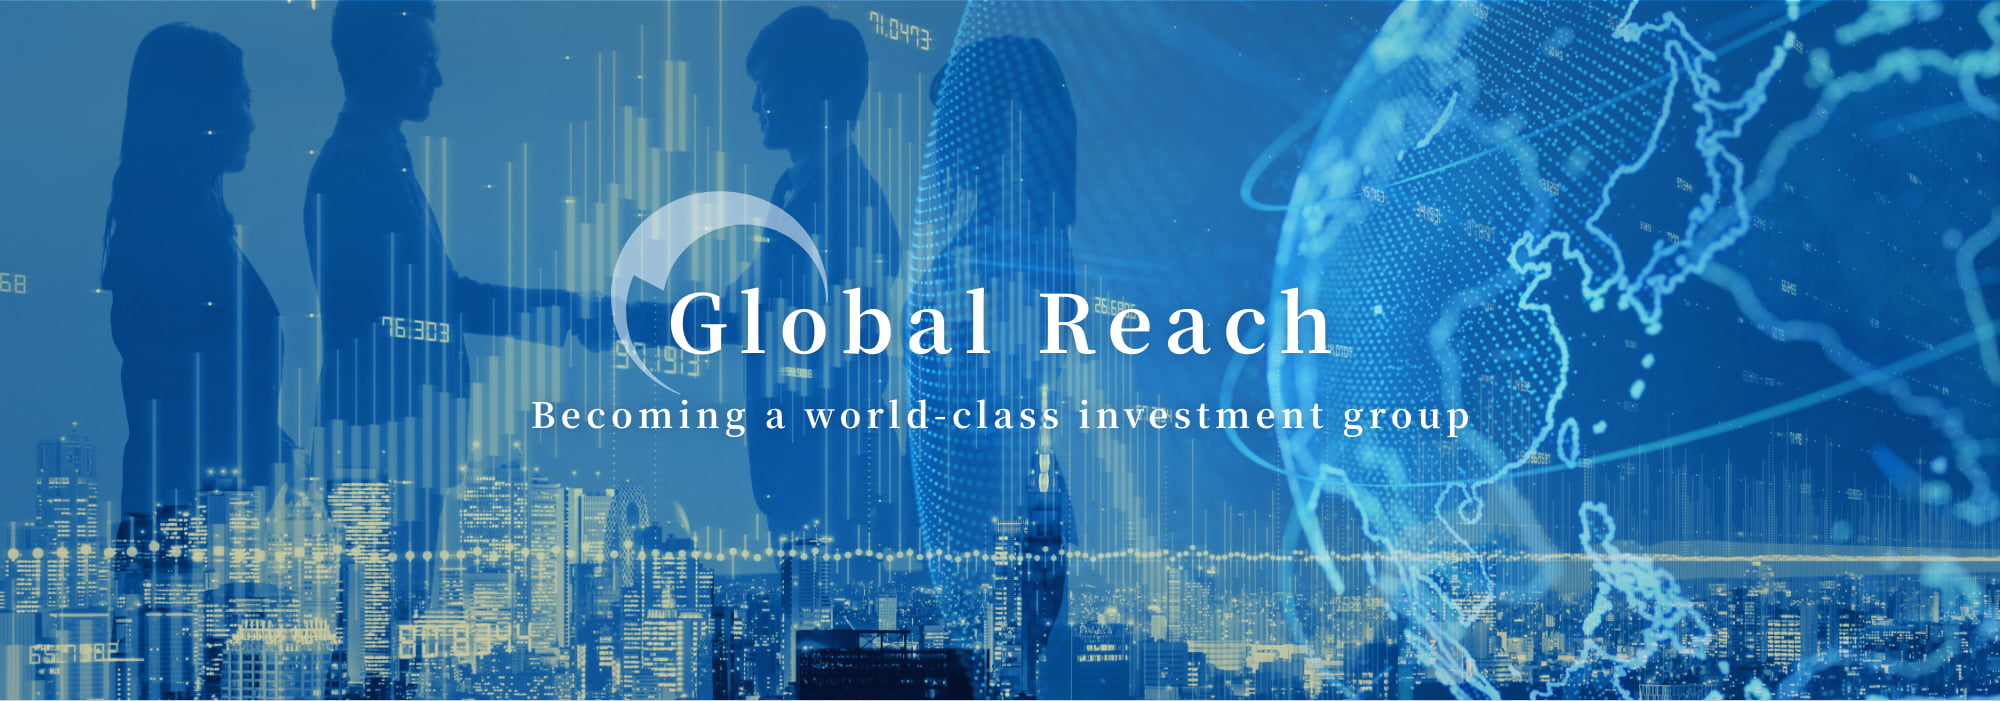 Global Reach : Becoming a world-class investment group